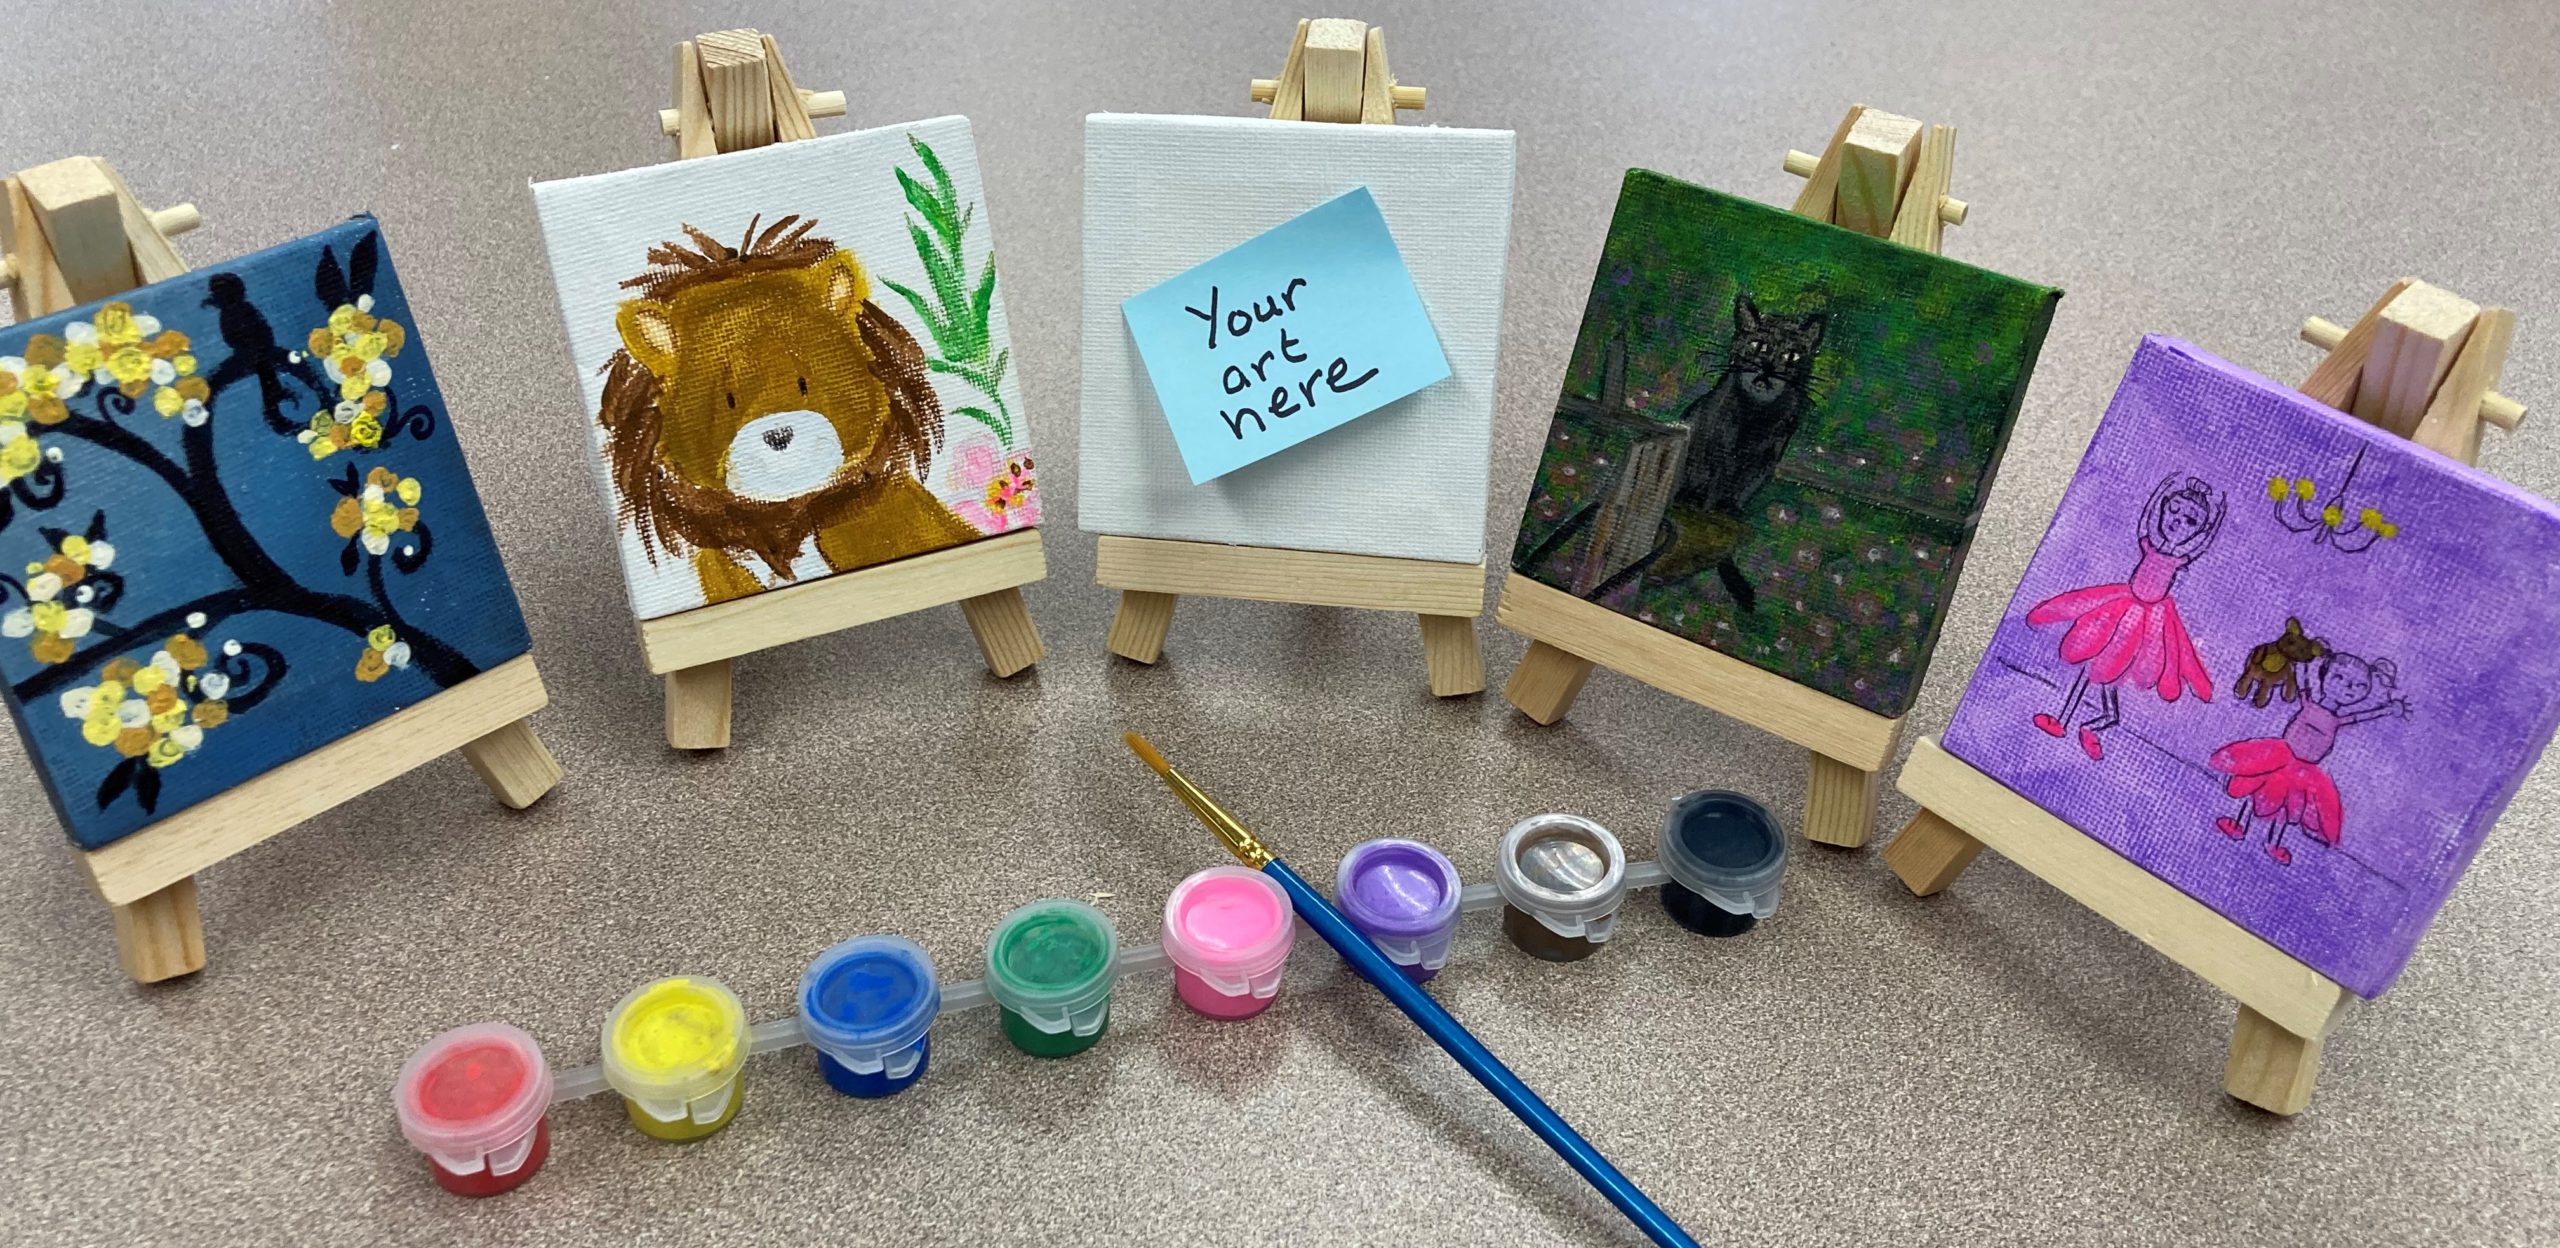 2nd Annual East Haddam Library System Tiny Art Show